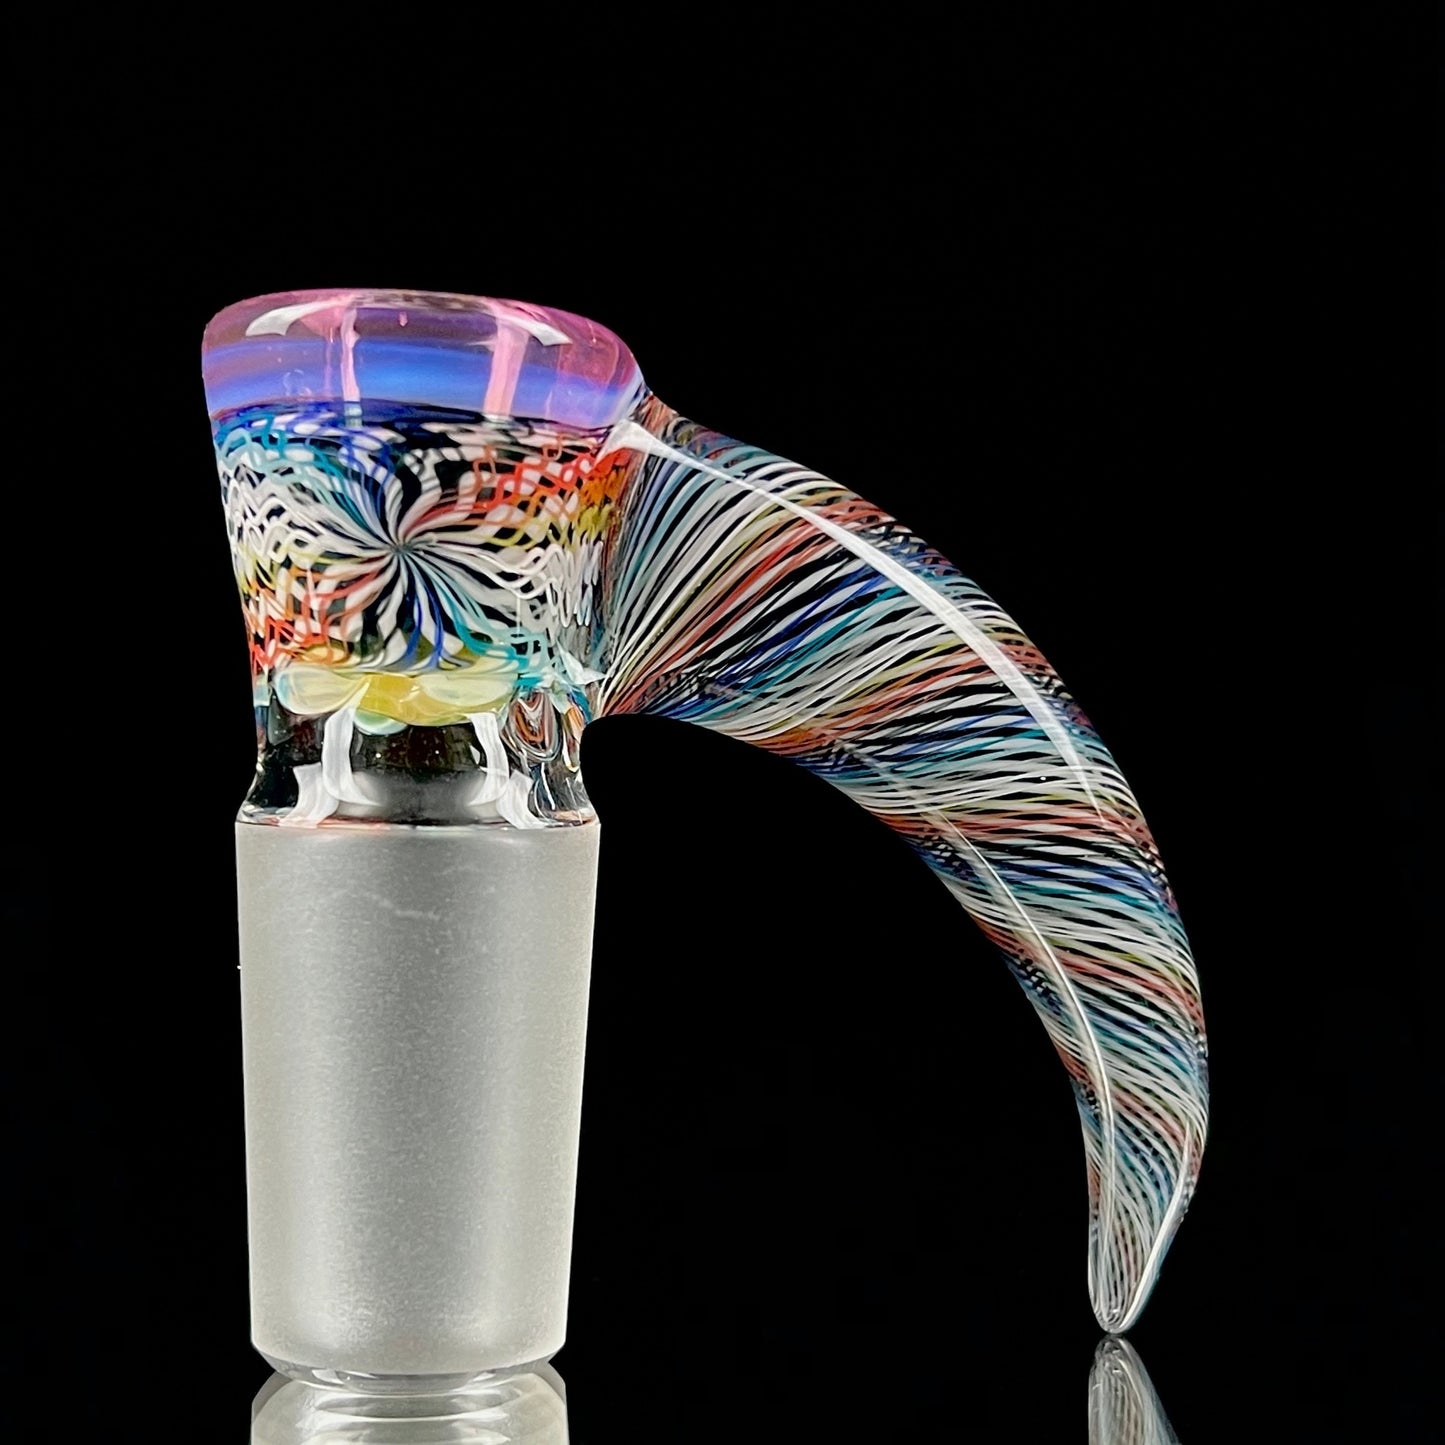 18mm Fire & Ice Hypnotech slide by Jared Wetmore